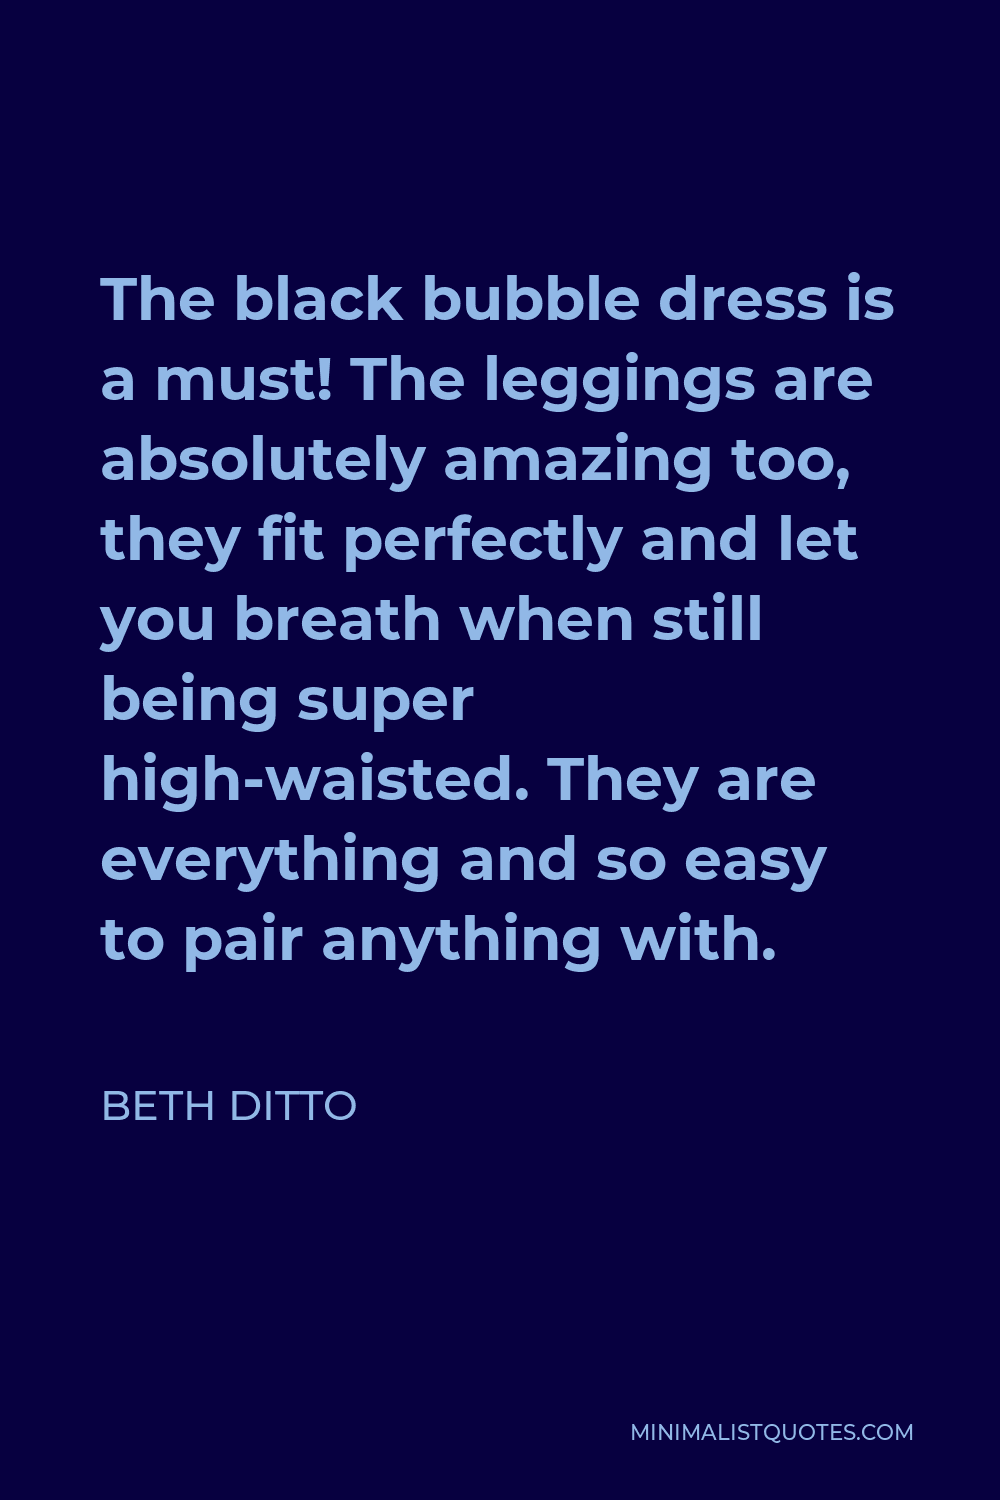 Beth Ditto Quote - The black bubble dress is a must! The leggings are absolutely amazing too, they fit perfectly and let you breath when still being super high-waisted. They are everything and so easy to pair anything with.